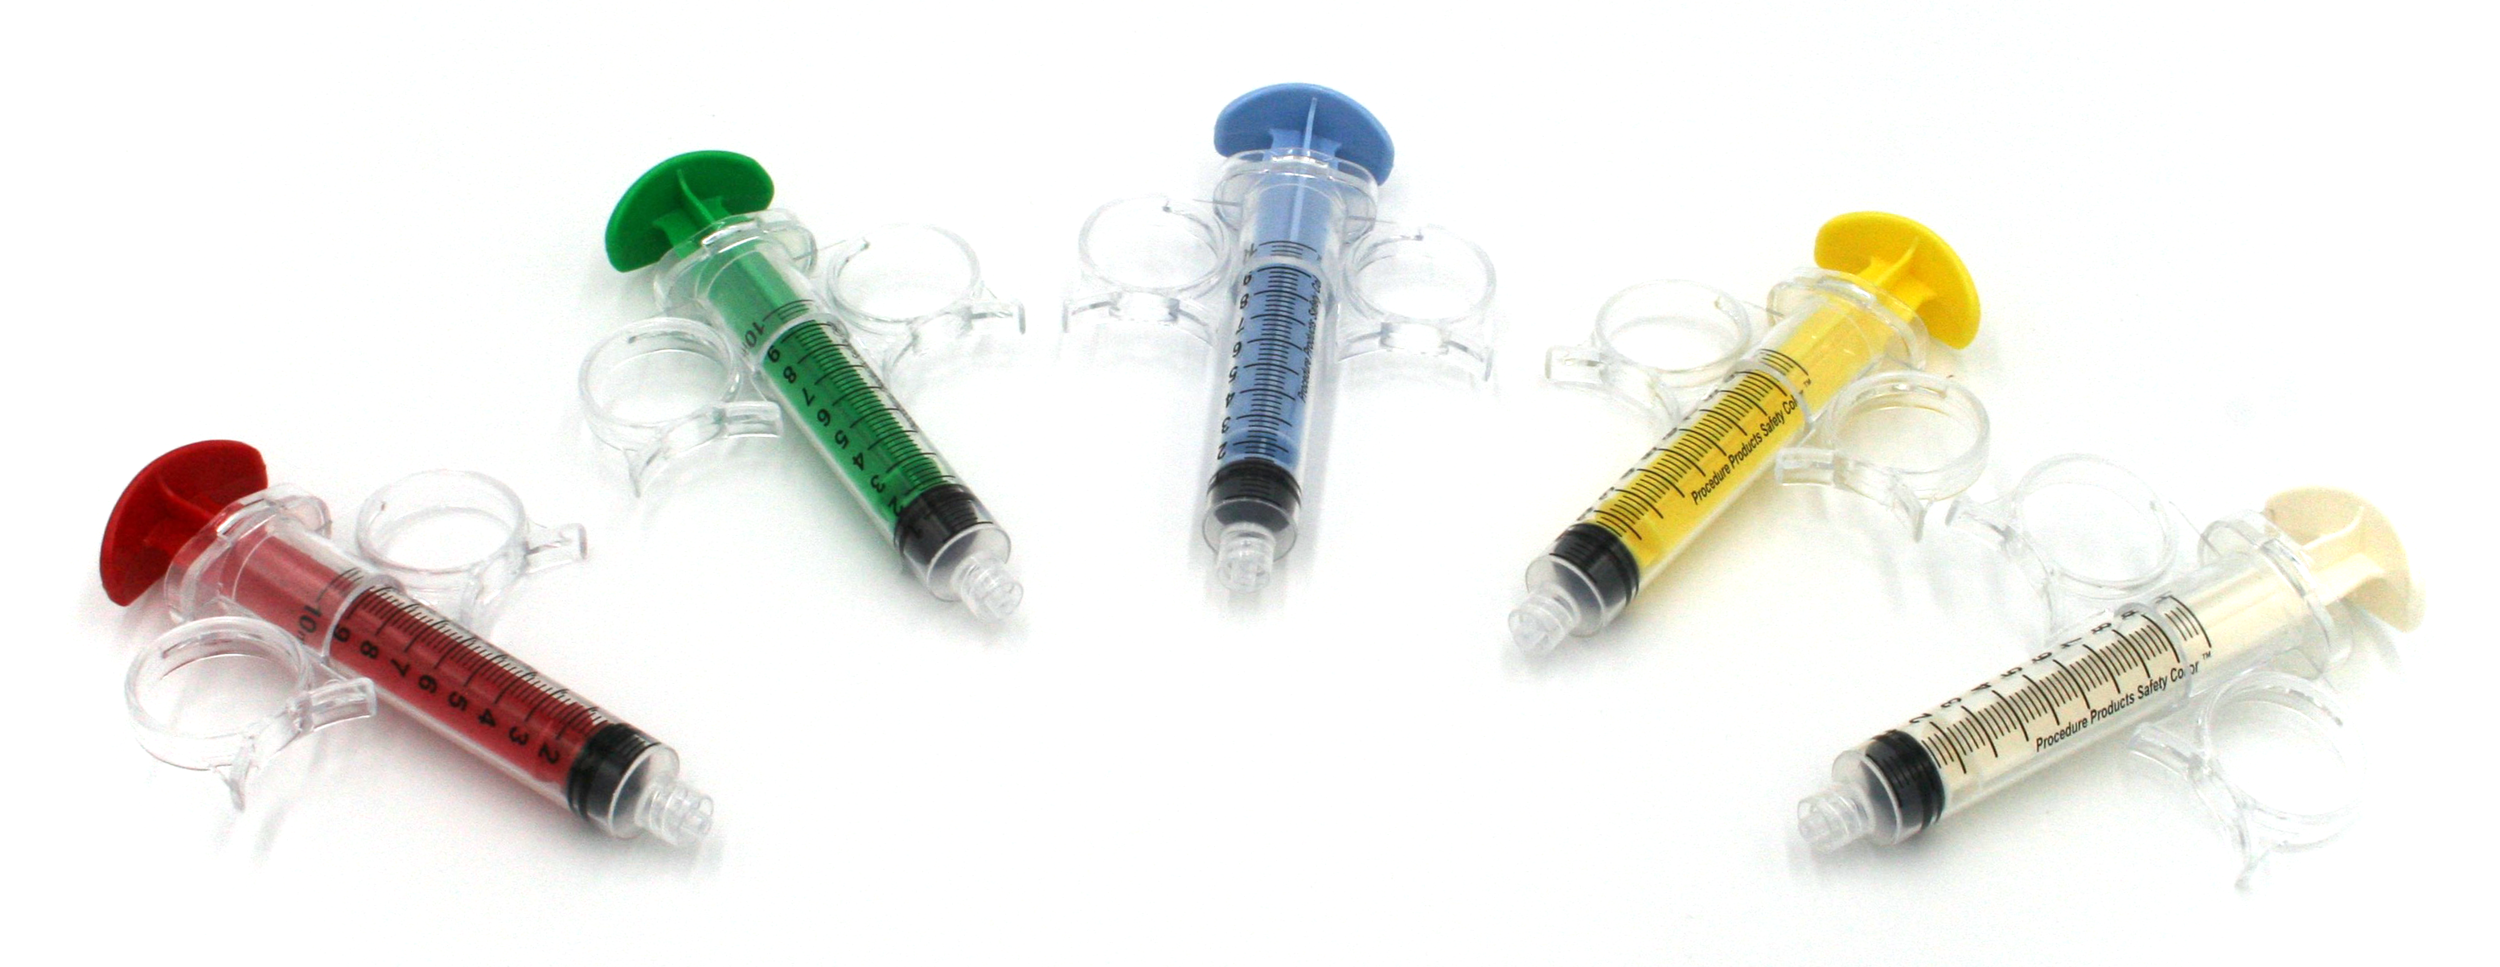 Old School-BMX Bike Oil 3-10cc Syringes with Stainless Steel Applicator 